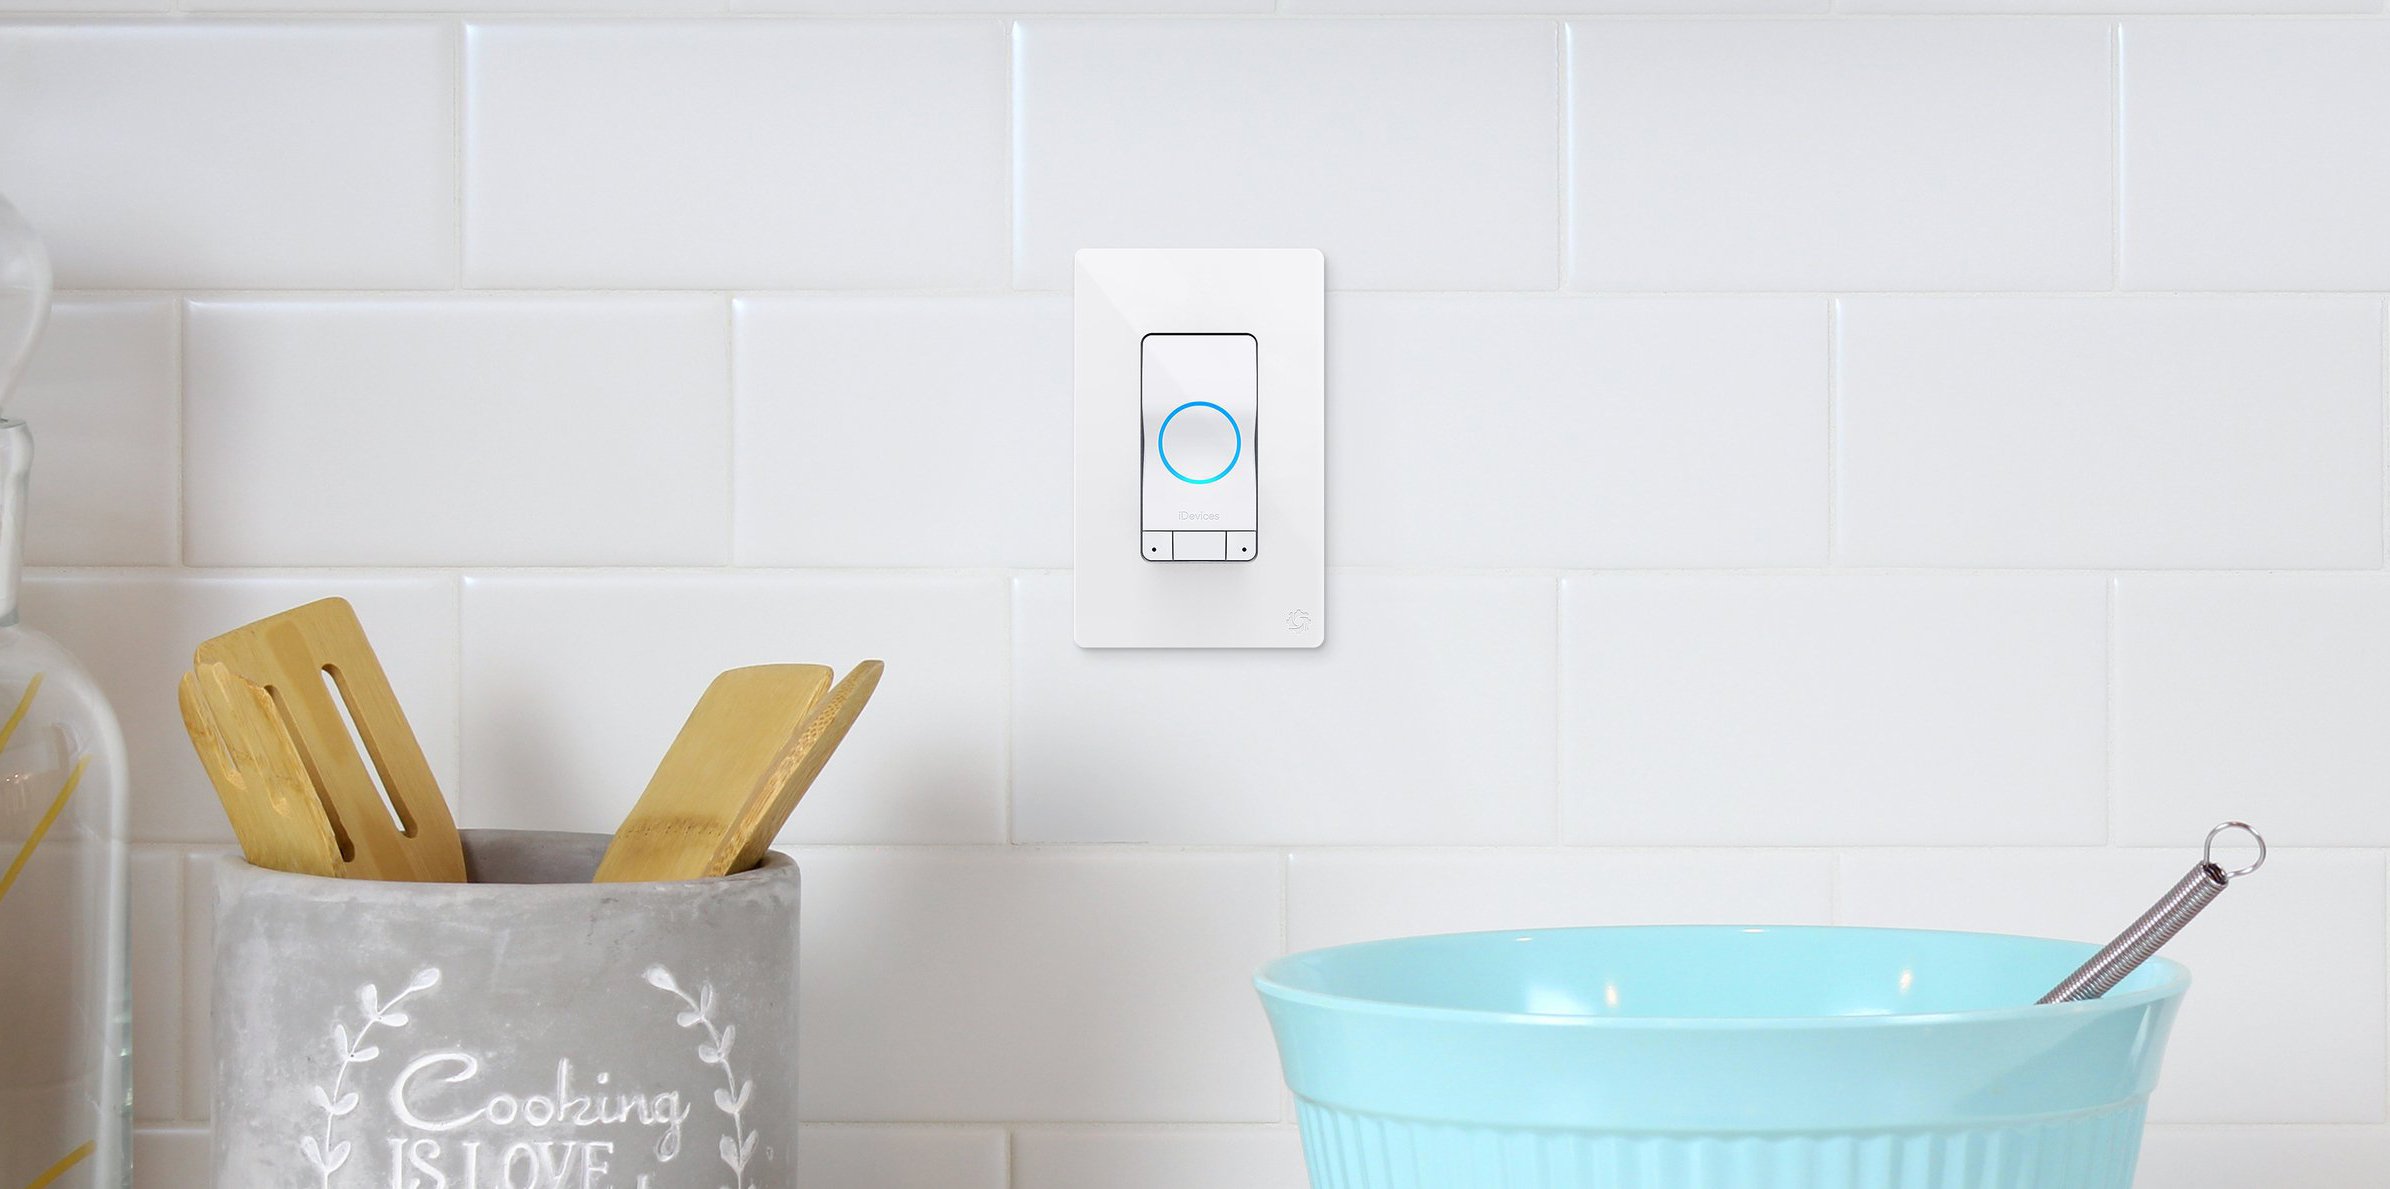 iDevices News, iDevices® Announces the Availability of Instinct™, the Smart Light Switch with Alexa Built-in
